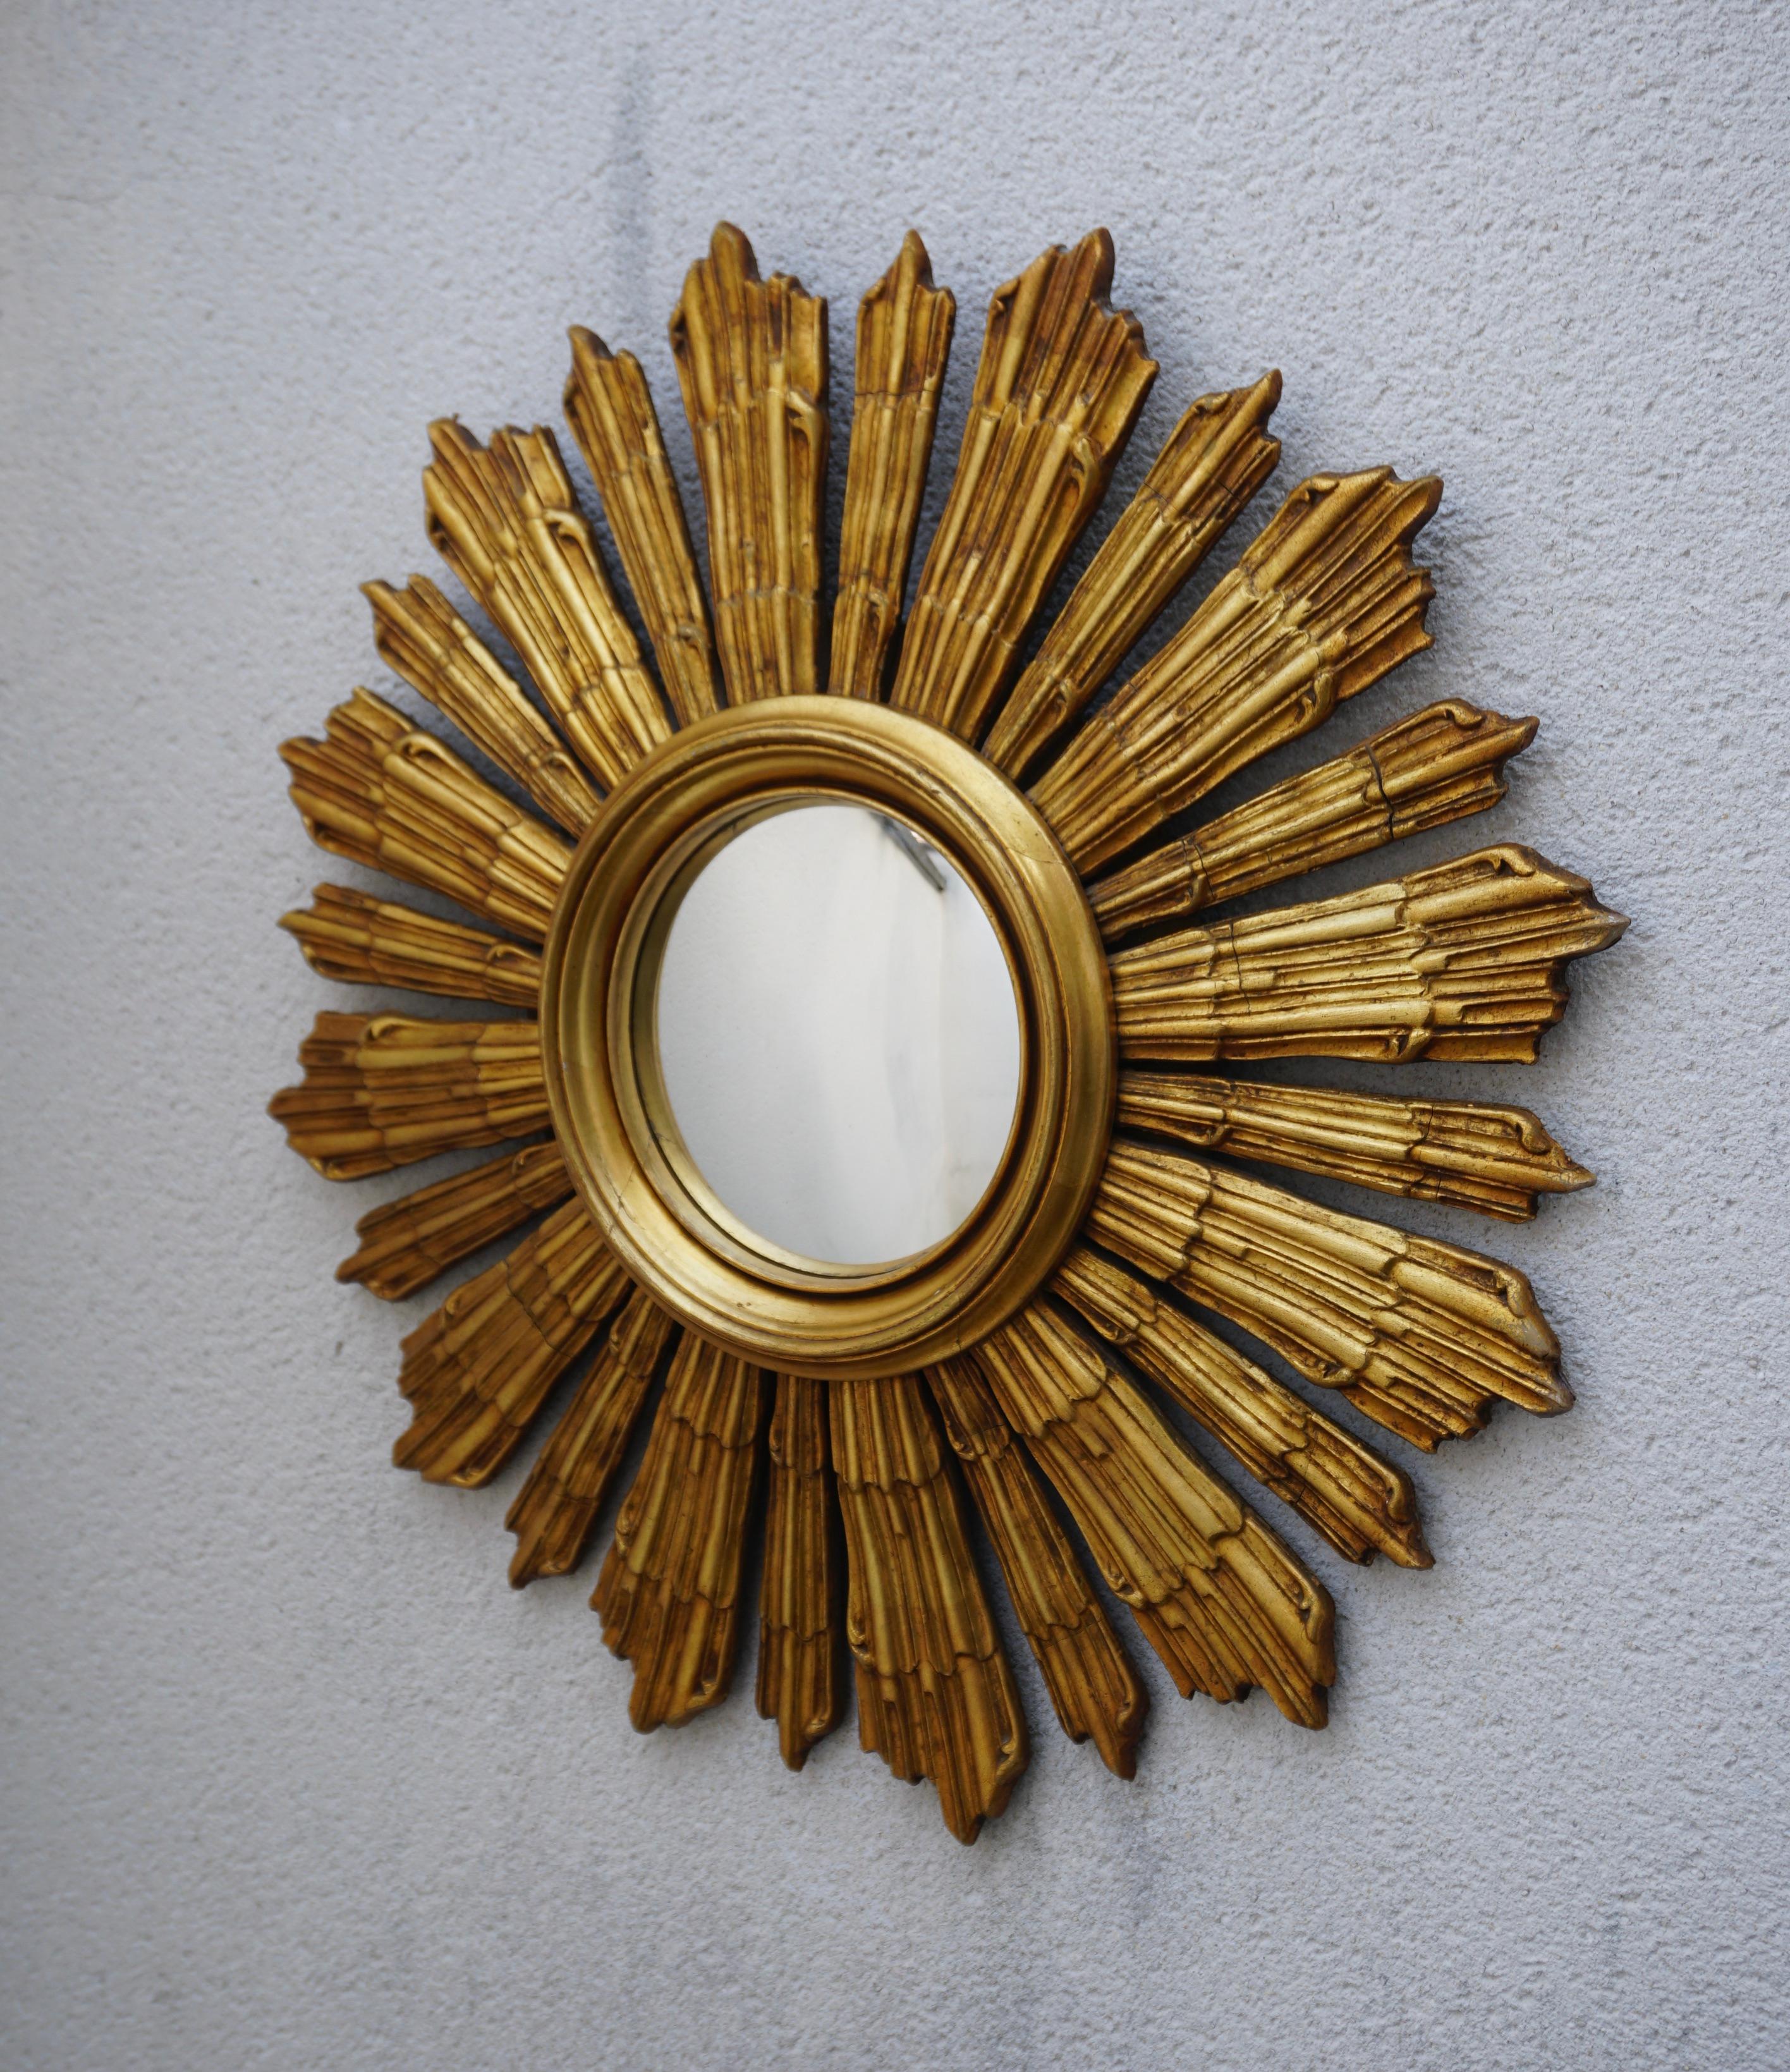 American Sunburst gilt carved wood and bullseye wall mirror with interior molded edge border. Mirror retains the original convex glass and backing. Mid-century.
Interior mirror diameter is 7.08 inches.